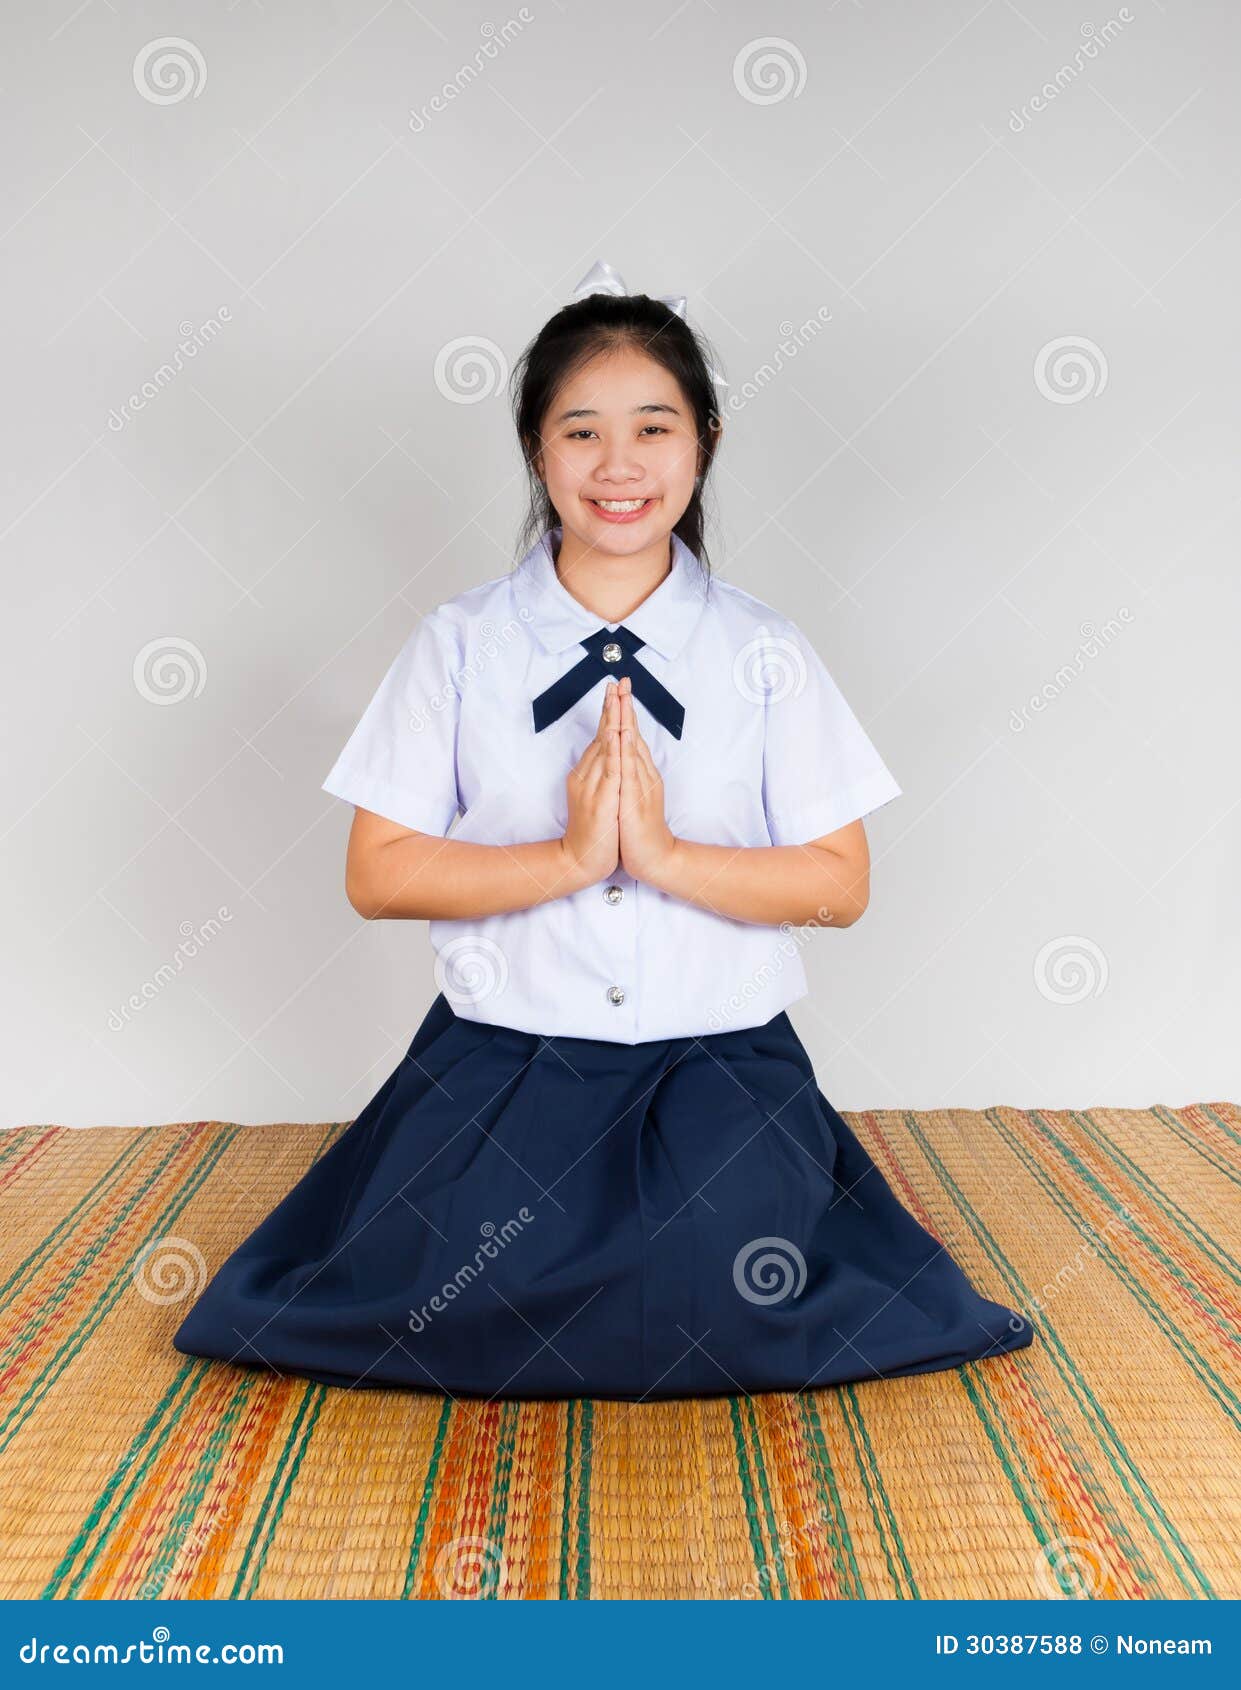 Paying Obeisance Of High School Asian Thai Student Stock Photo Image